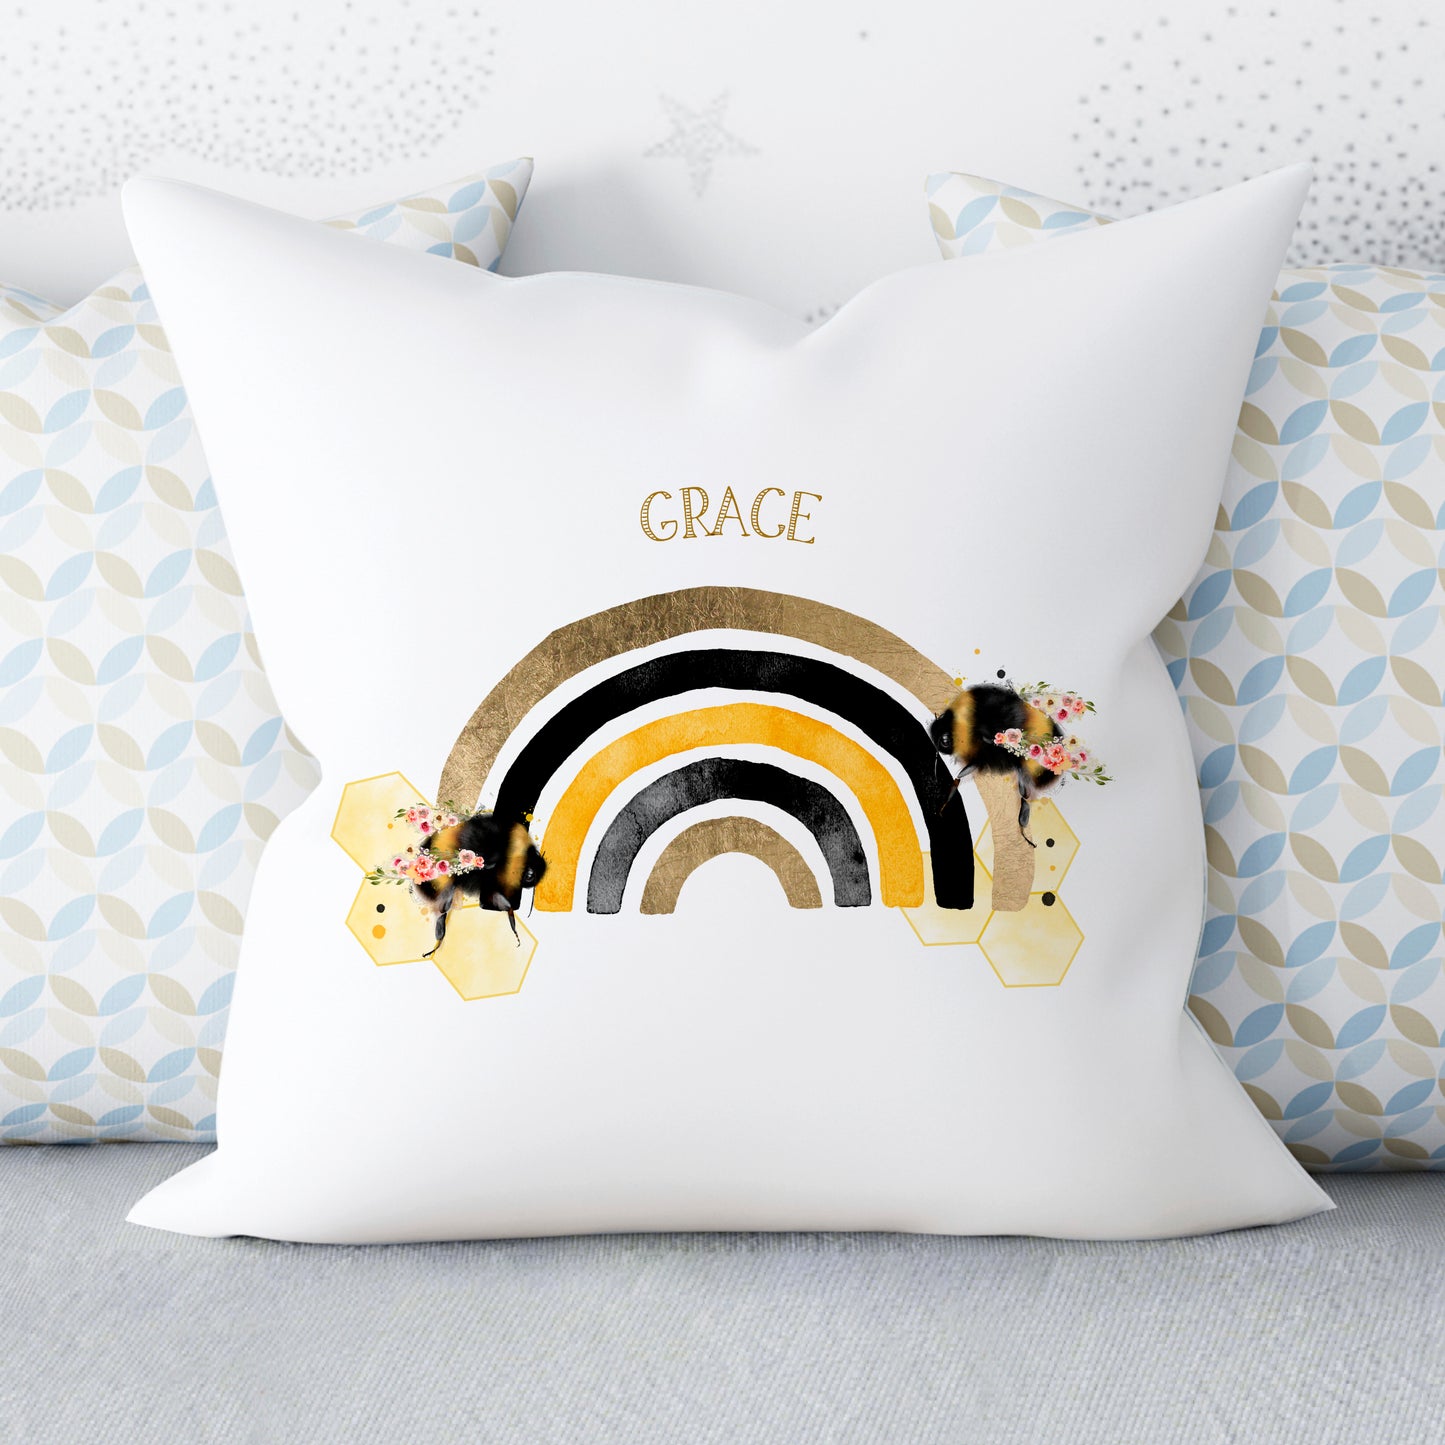 bumble-bee-gift-ideas